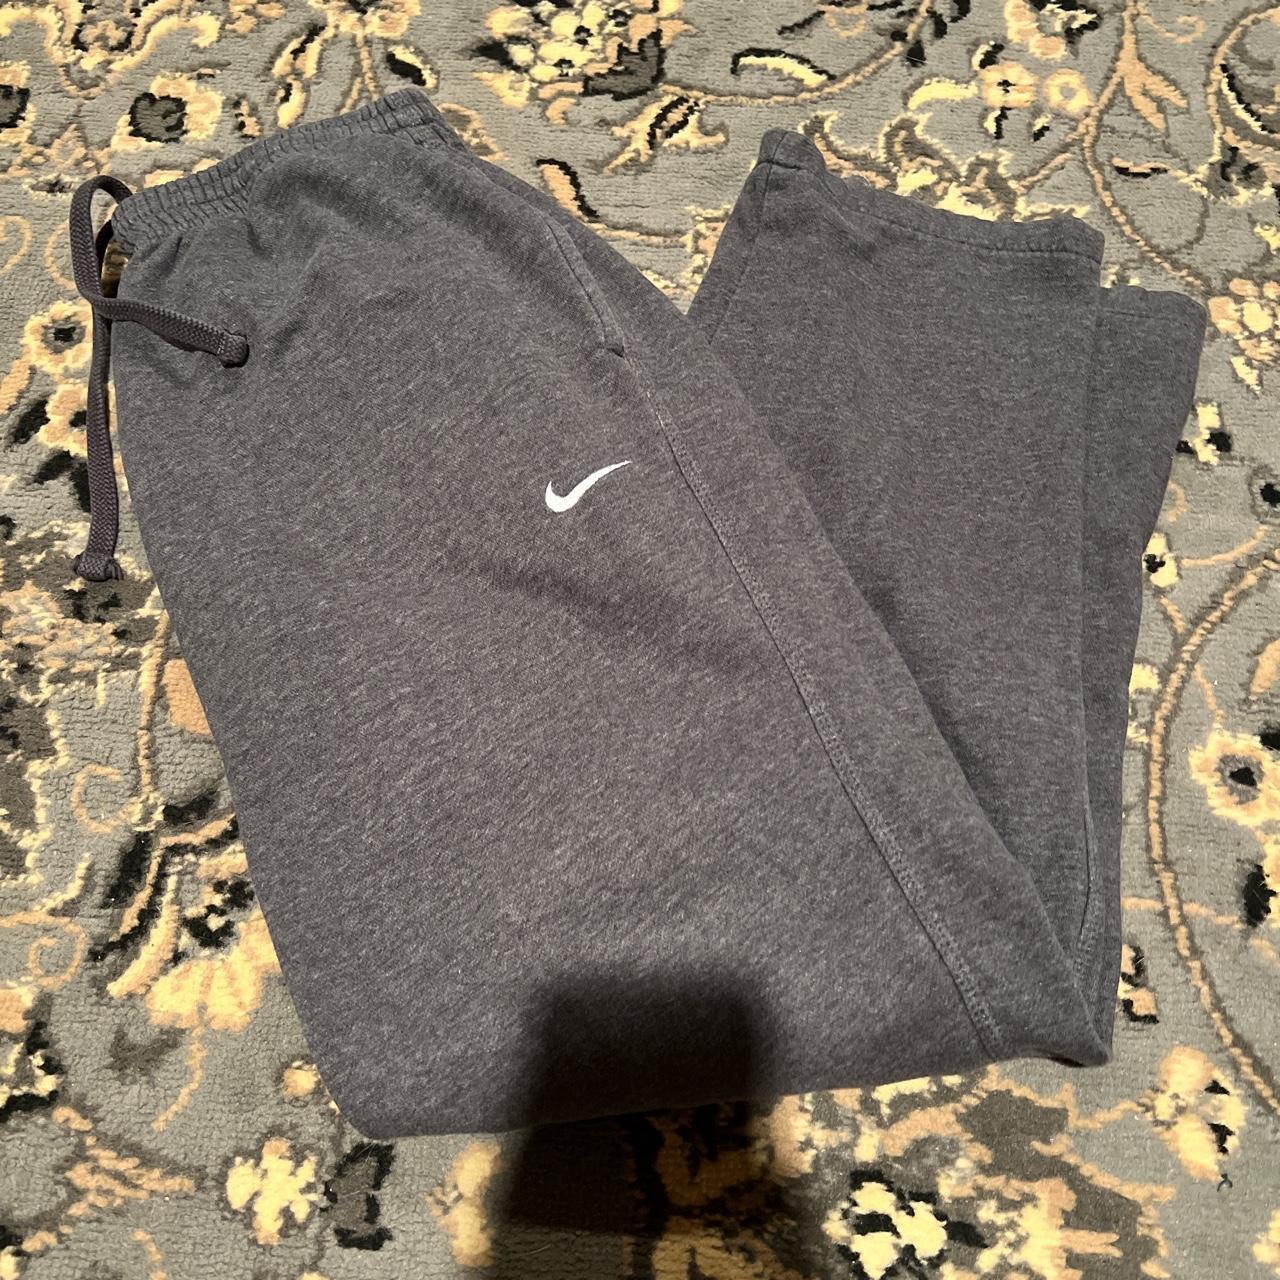 Super clean nike track pants. Cuff at the bottom - Depop